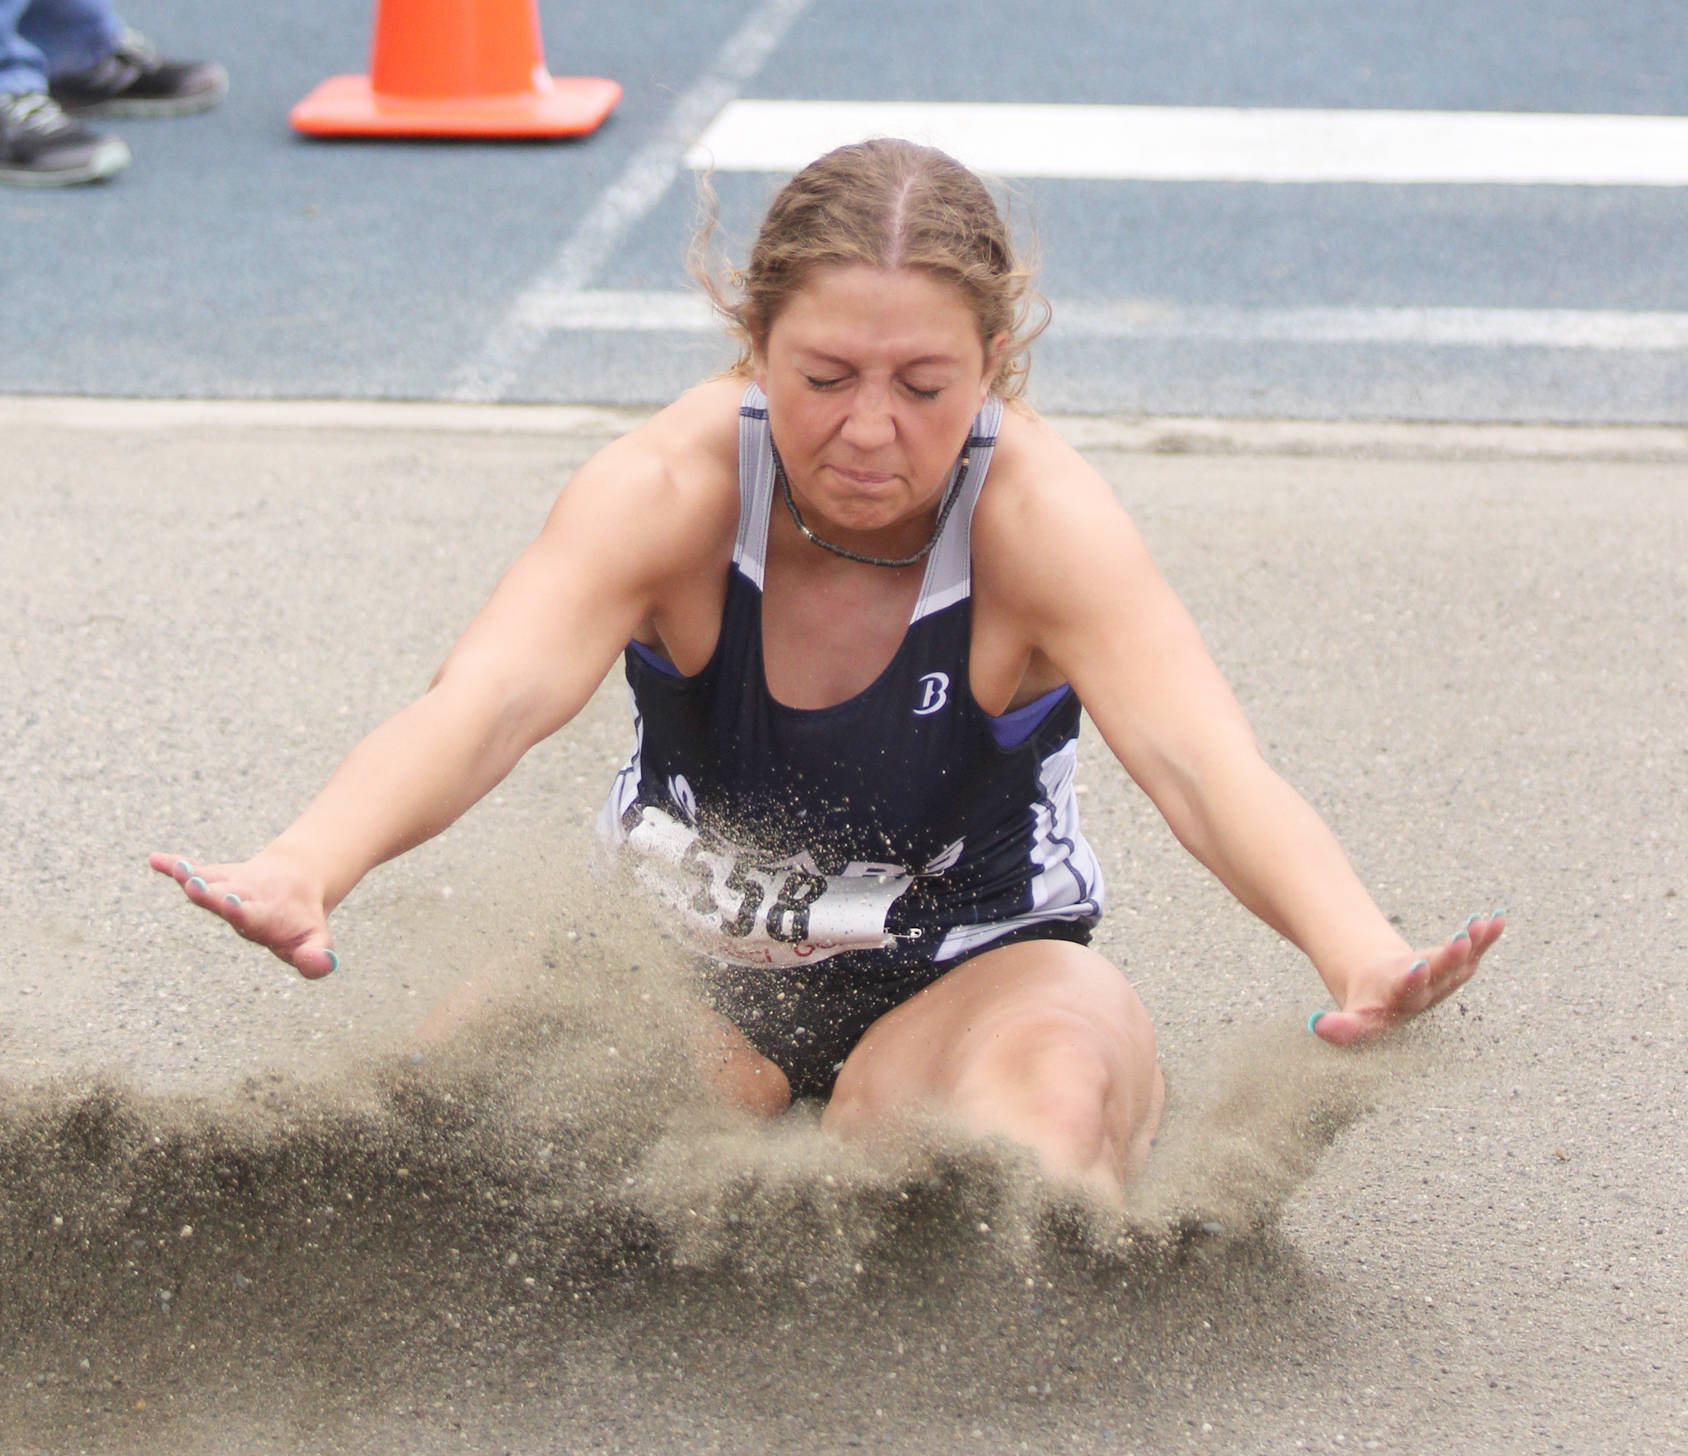 Soldotna’s Kylie Ness lands in the put during the Division I girls’ long jump of the ASAA/First National State Track and Field Championships Friday, May 24, 2019, at Palmer High School.